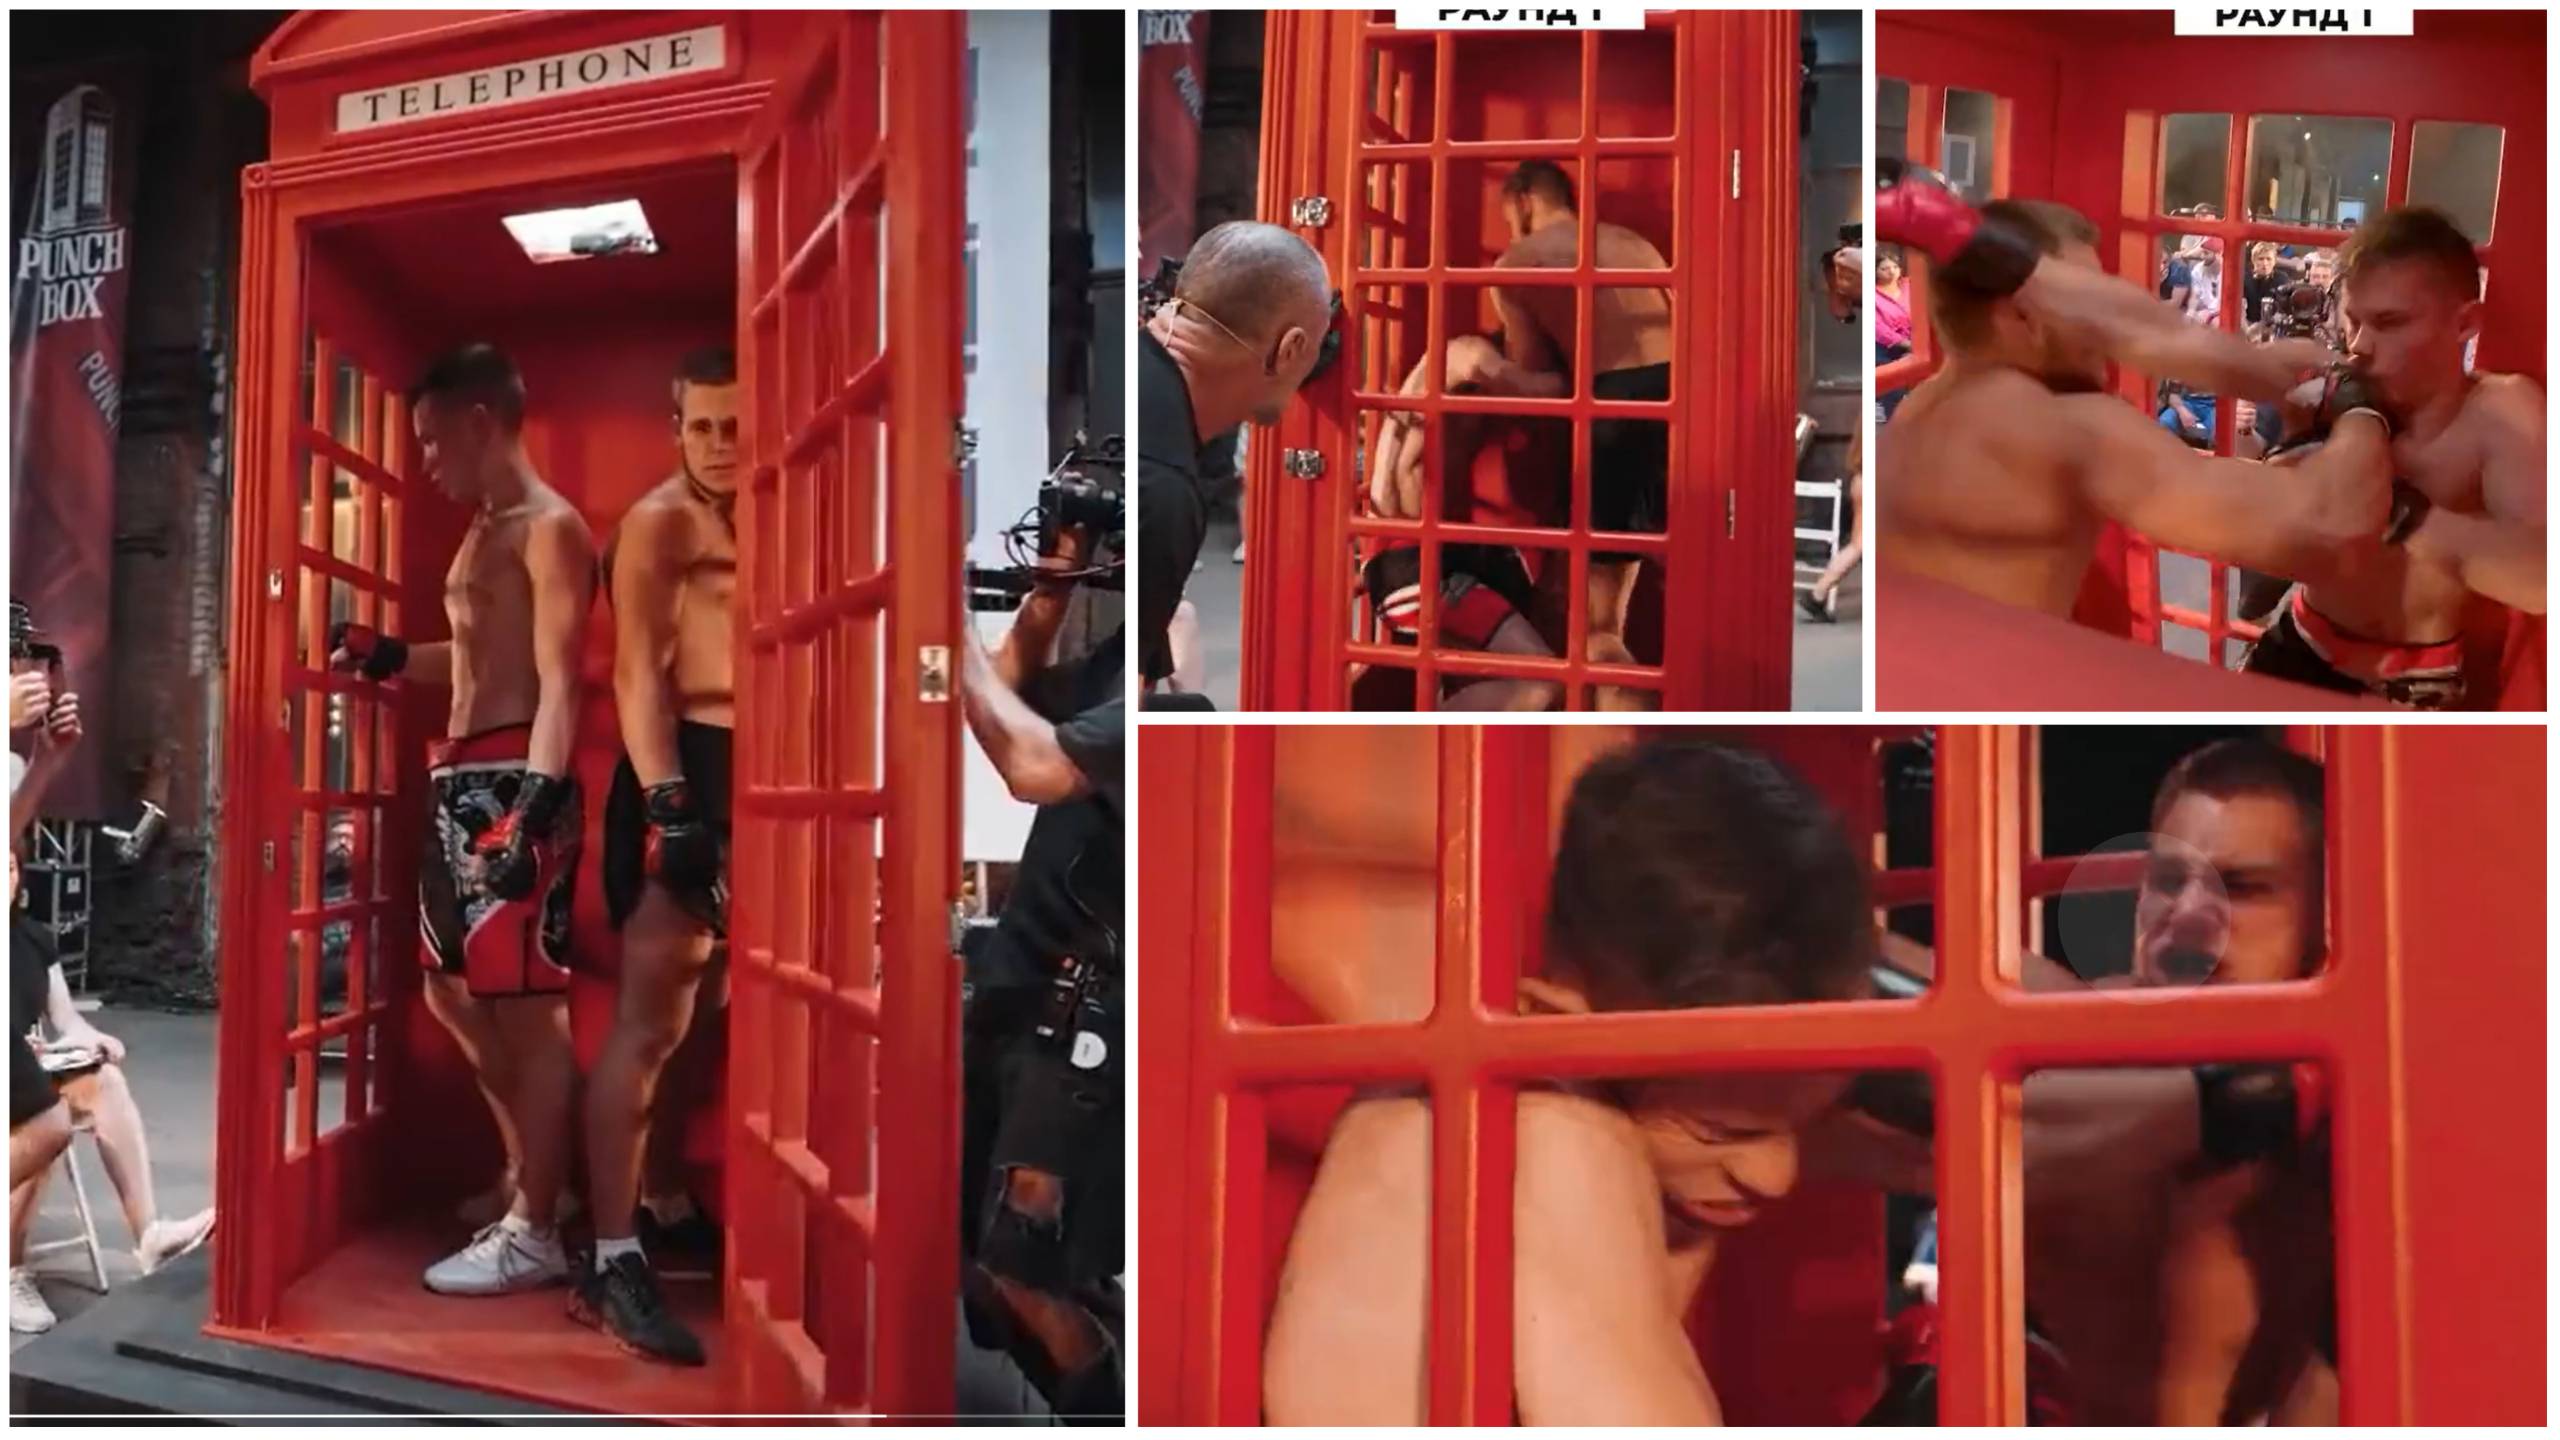 Phone booth fighting is genuinely a thing and to say it's wild would be an understatement